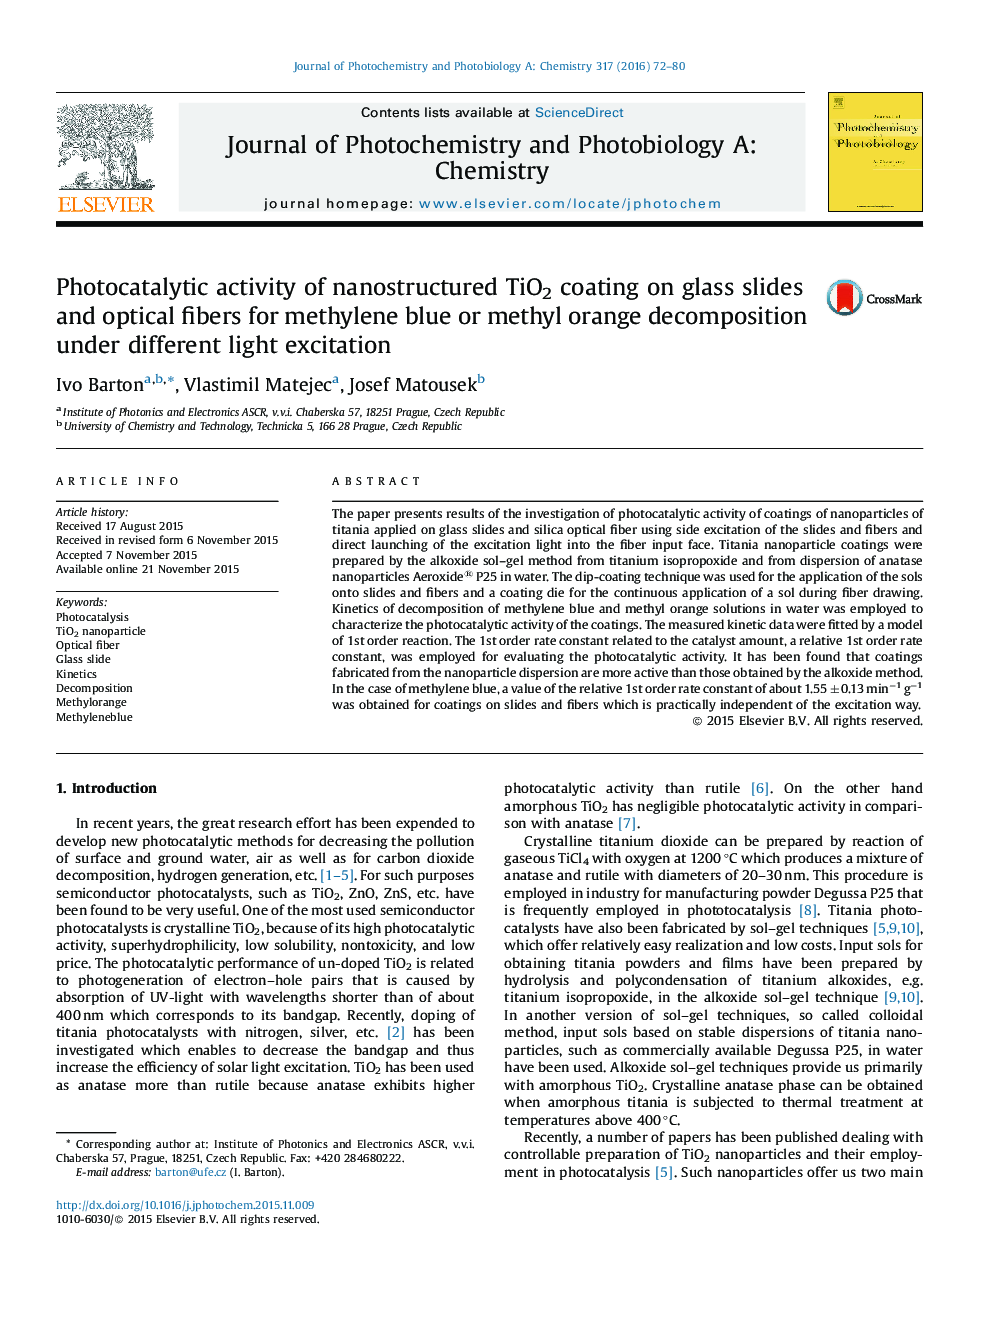 Photocatalytic activity of nanostructured TiO2 coating on glass slides and optical fibers for methylene blue or methyl orange decomposition under different light excitation